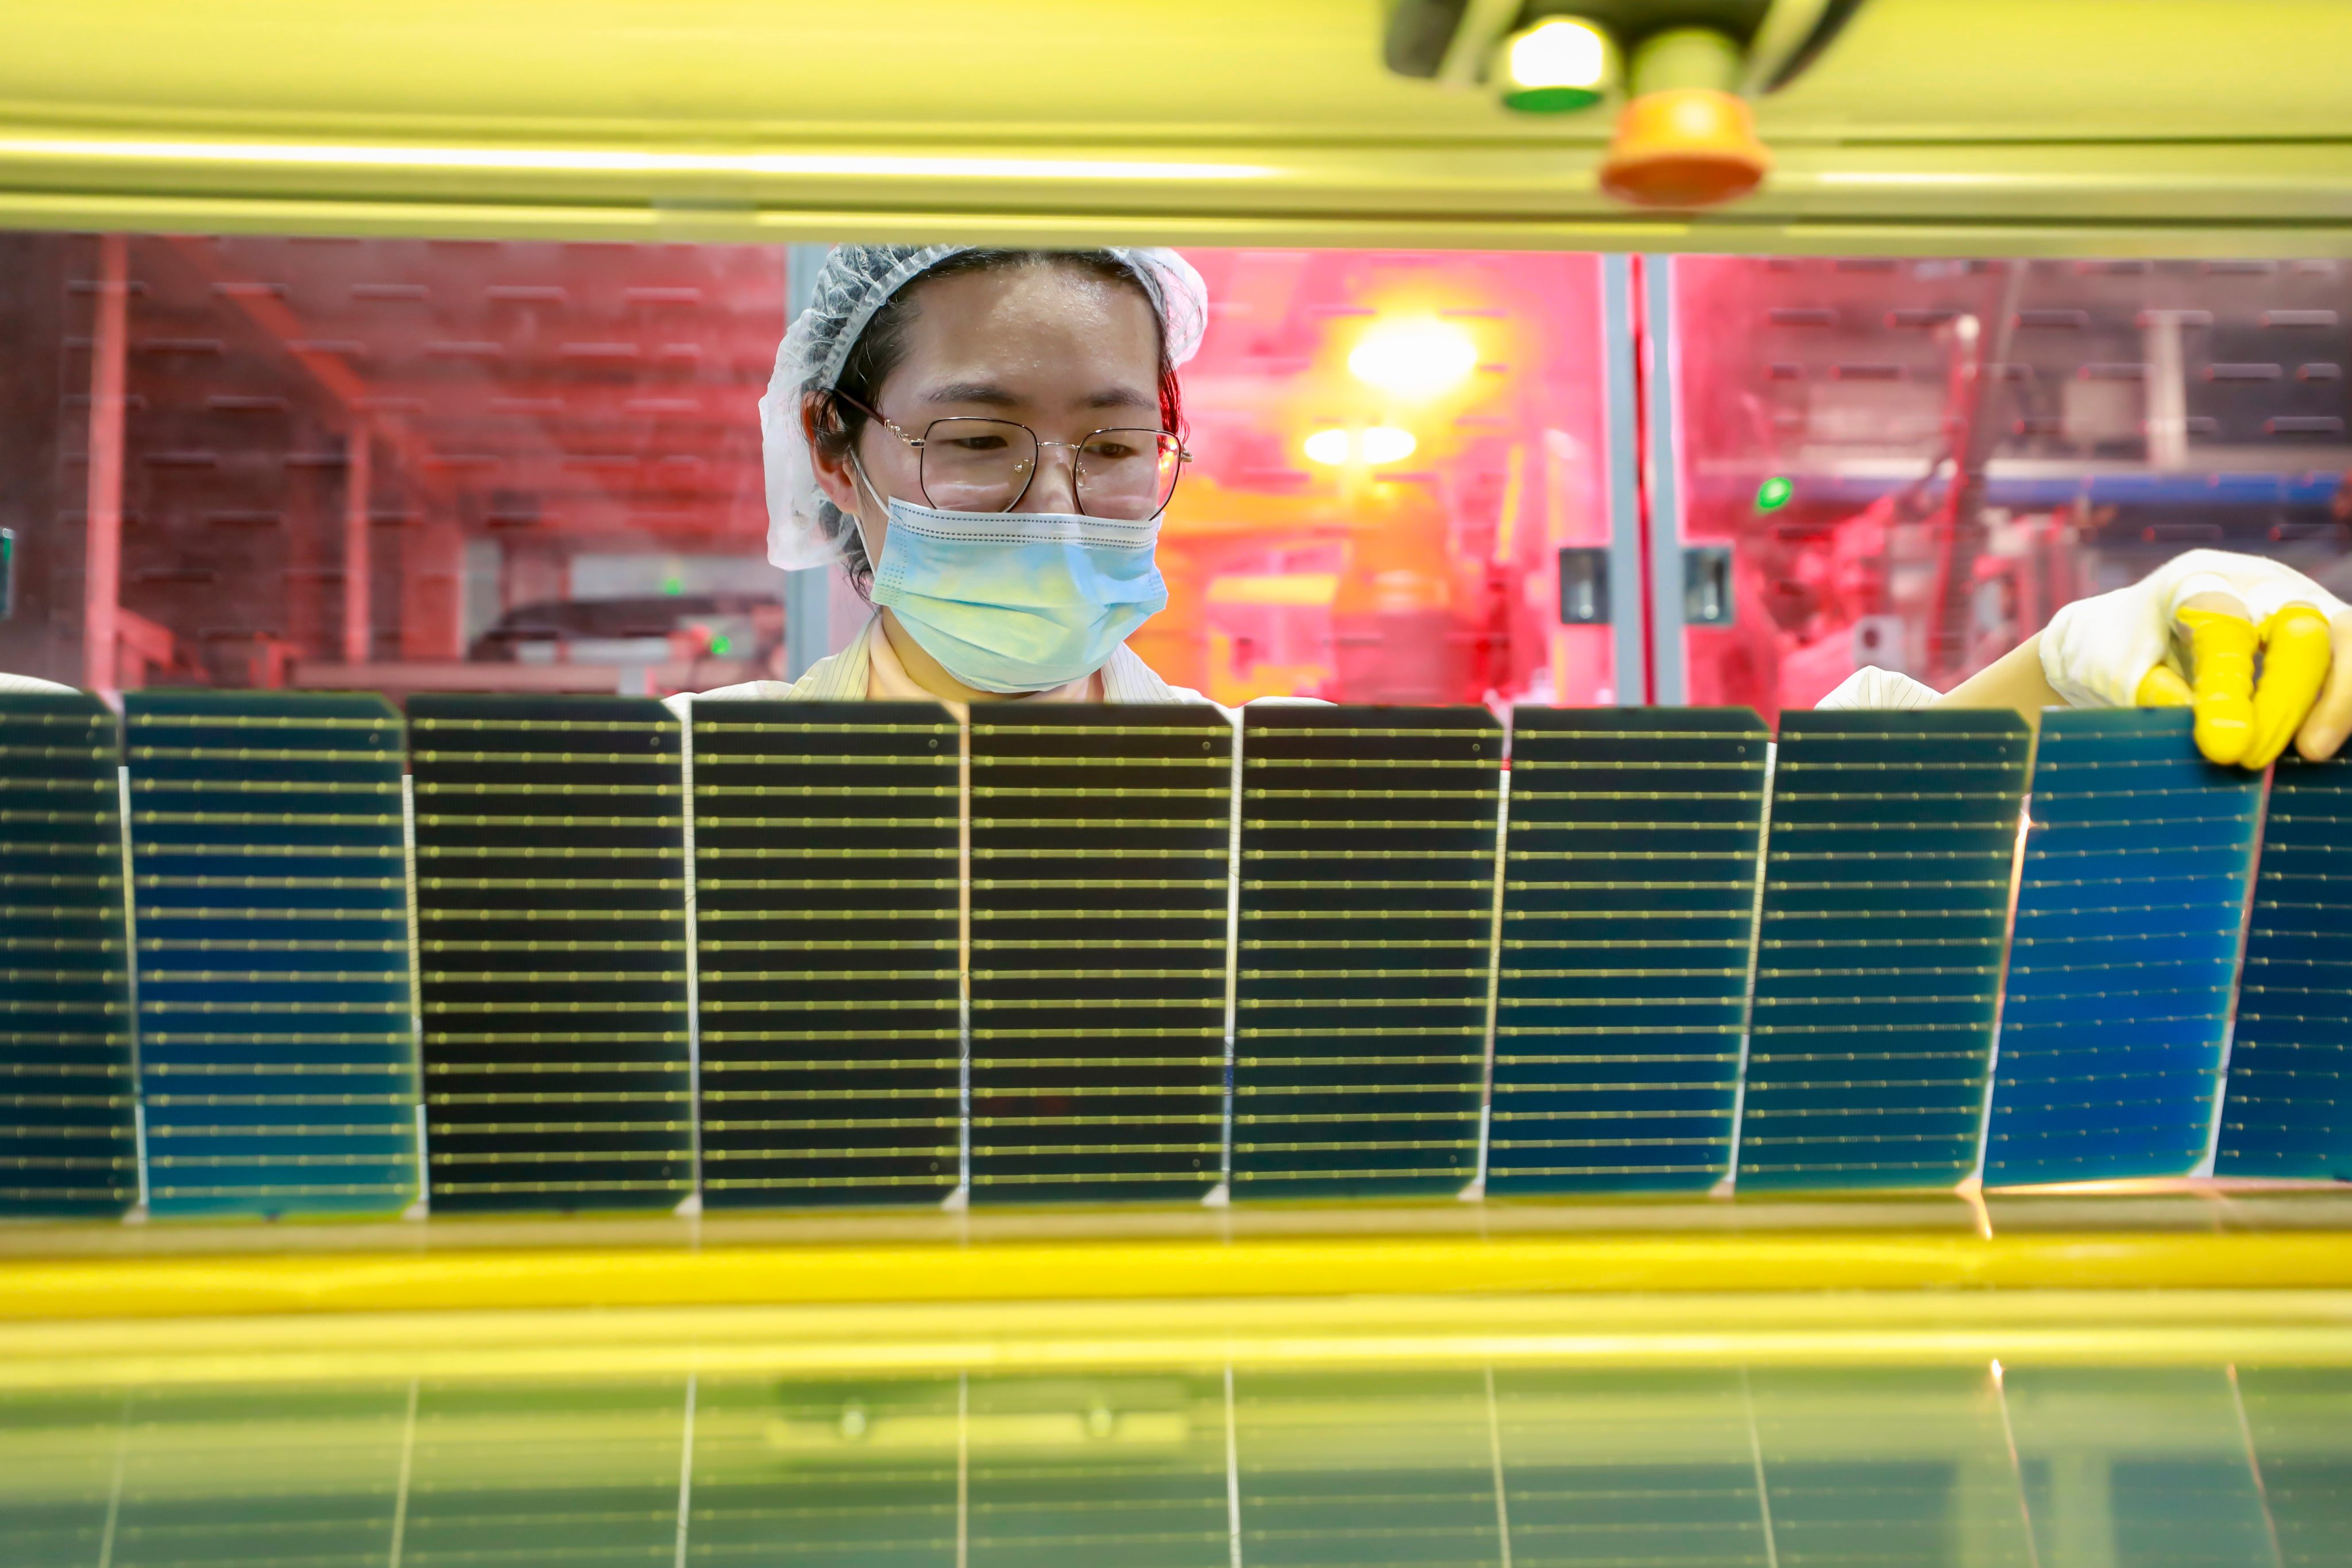 China’s annual supply capacity of solar panels reached between 800 gigawatts and 1,100 gigawatts last year, well ahead of projected global demand of some 300 gigawatts, according to the Economist Intelligence Unit. Photo: Getty Images